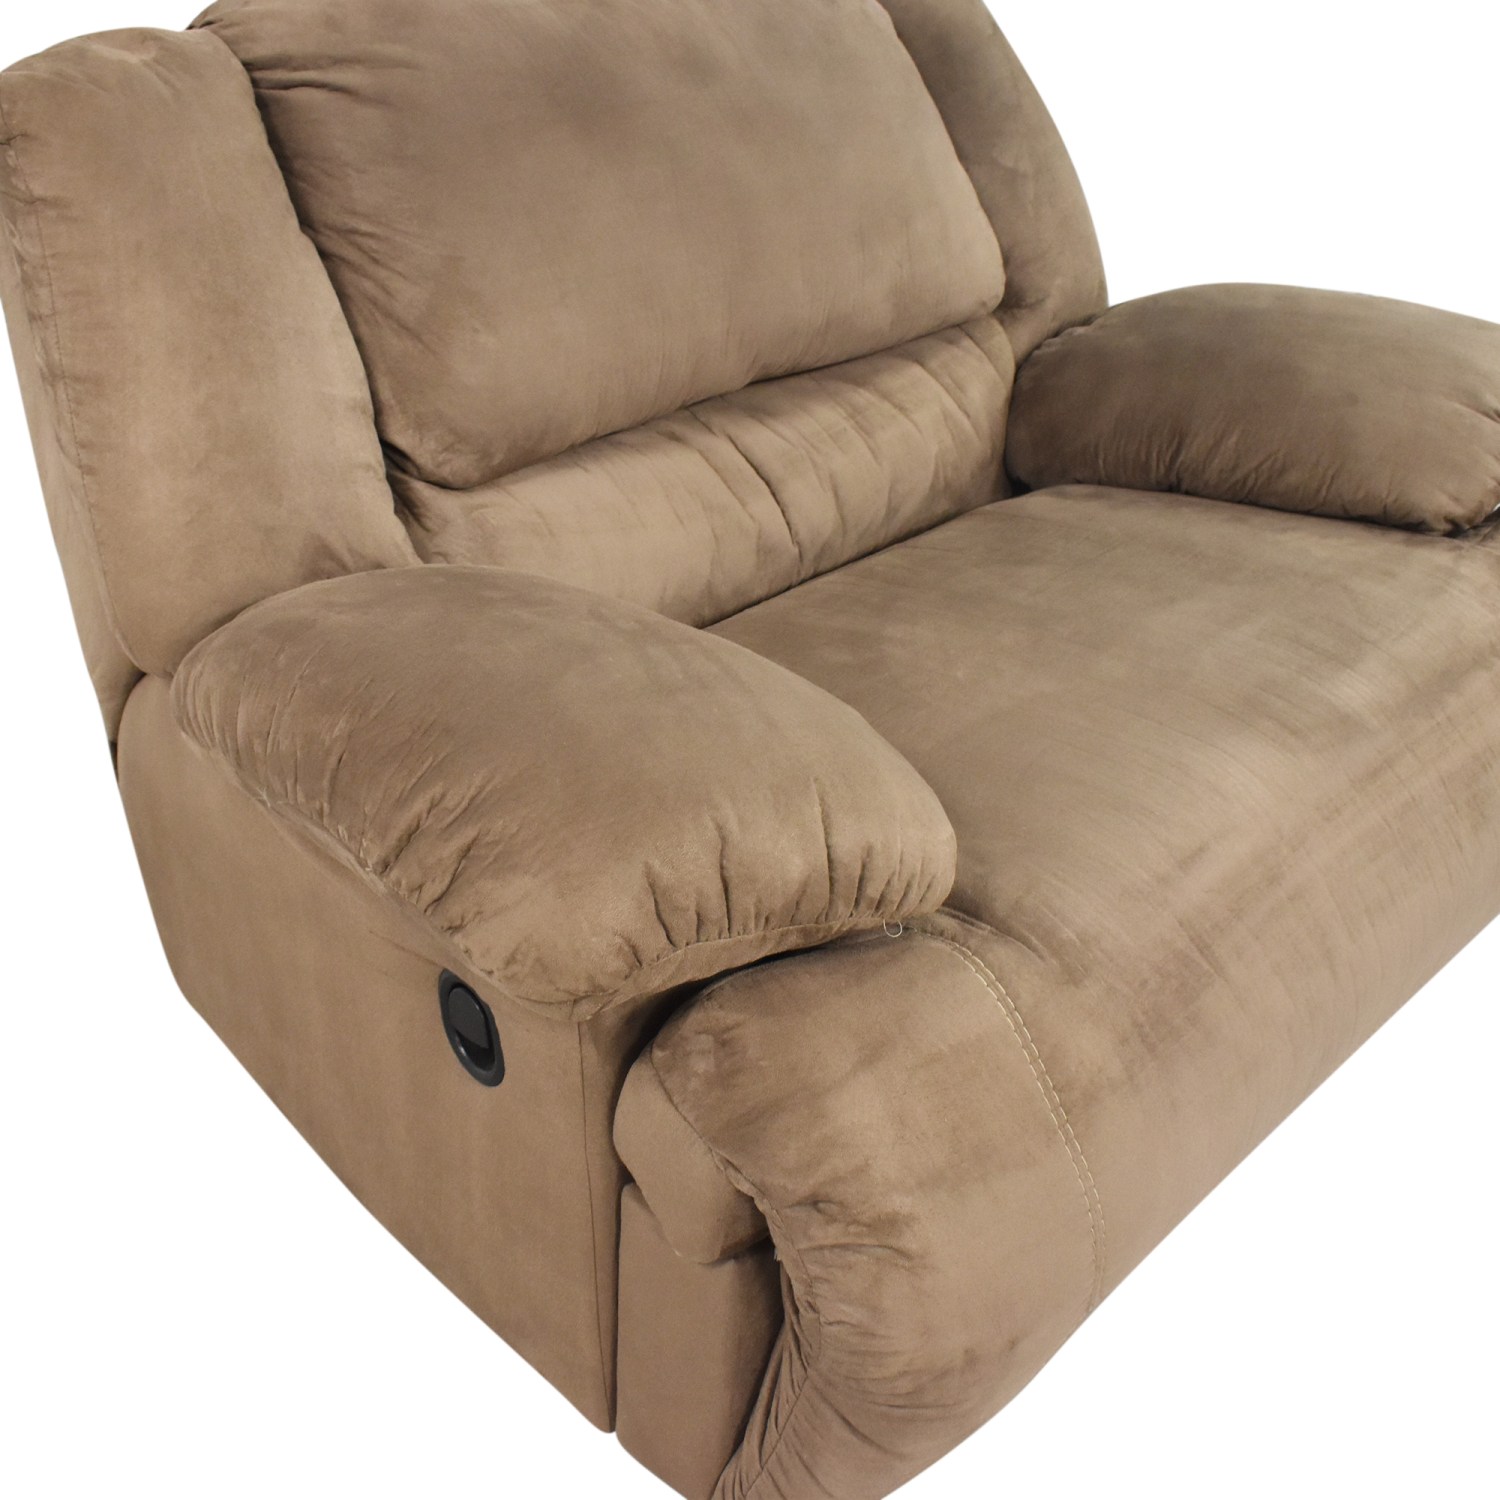 Signature Design by Ashley Acieona 58300-28 Swivel Rocker Recliner with  Quilted Cushion Style, Furniture and ApplianceMart